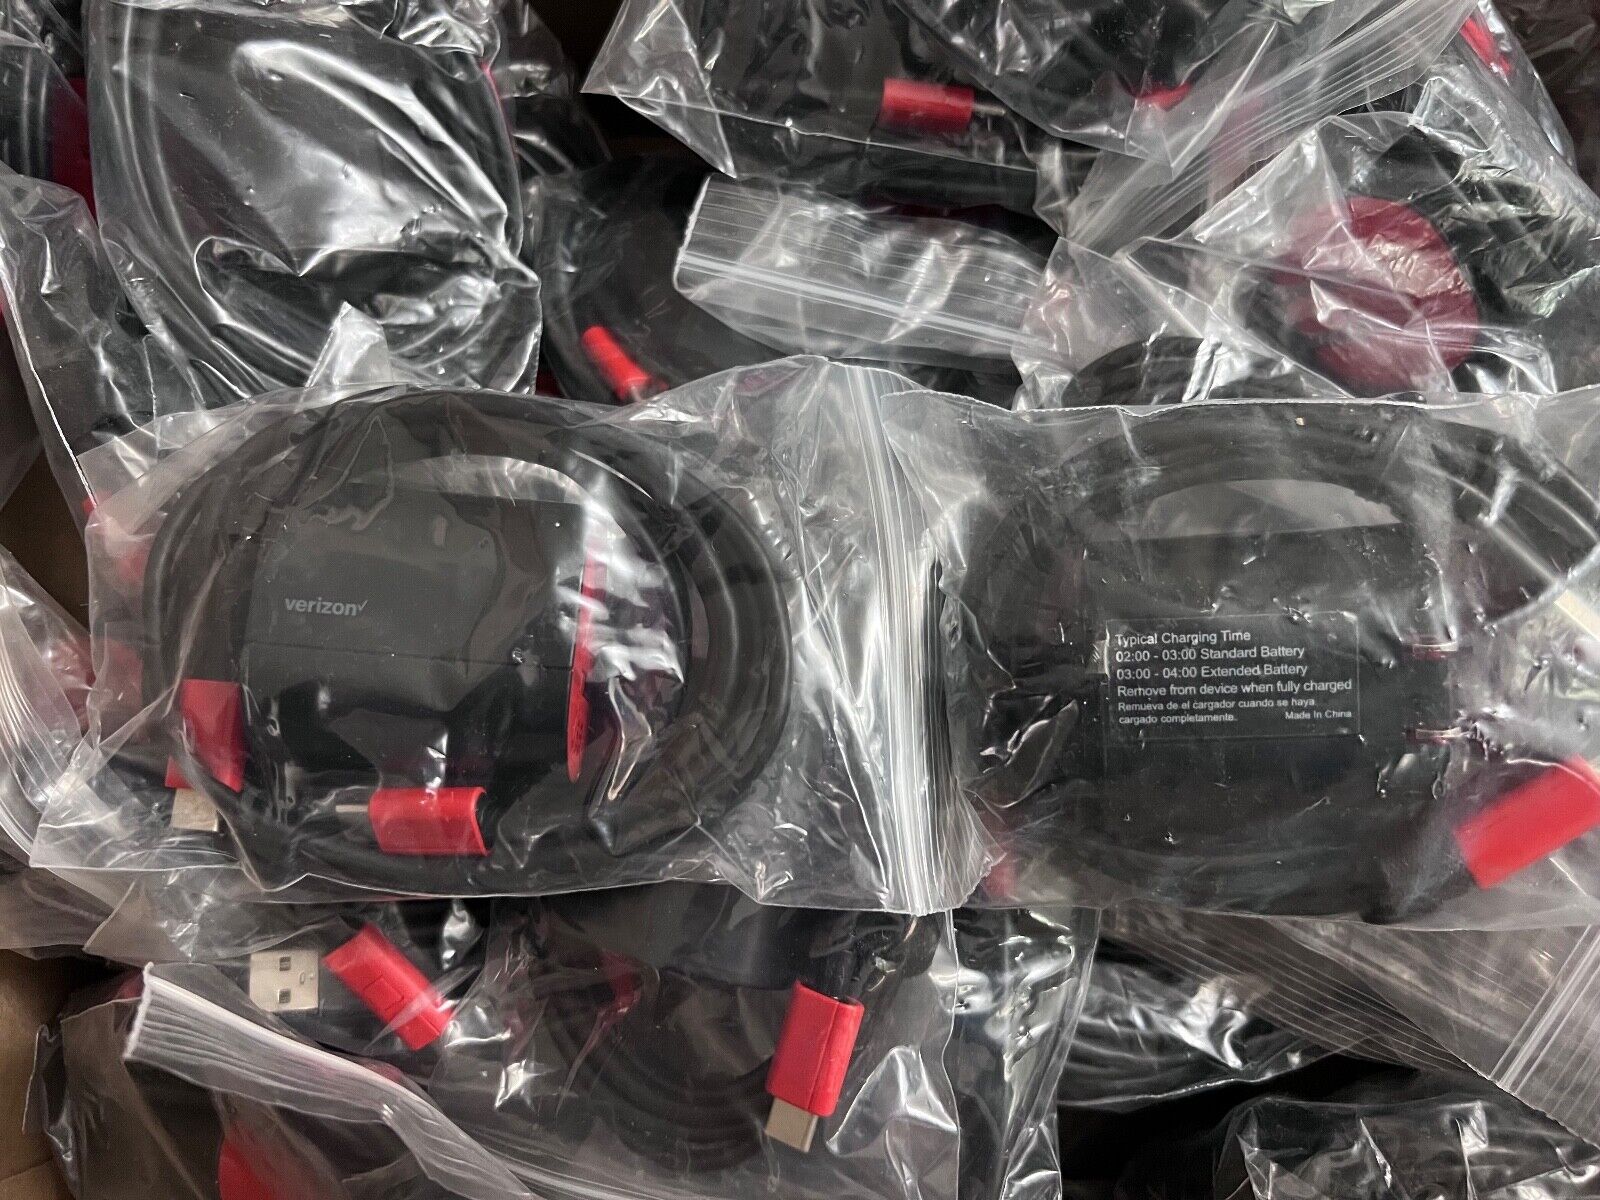 Lot of 50 New Original Verizon Black Fast Charge Micro USB Home Charger Adapter